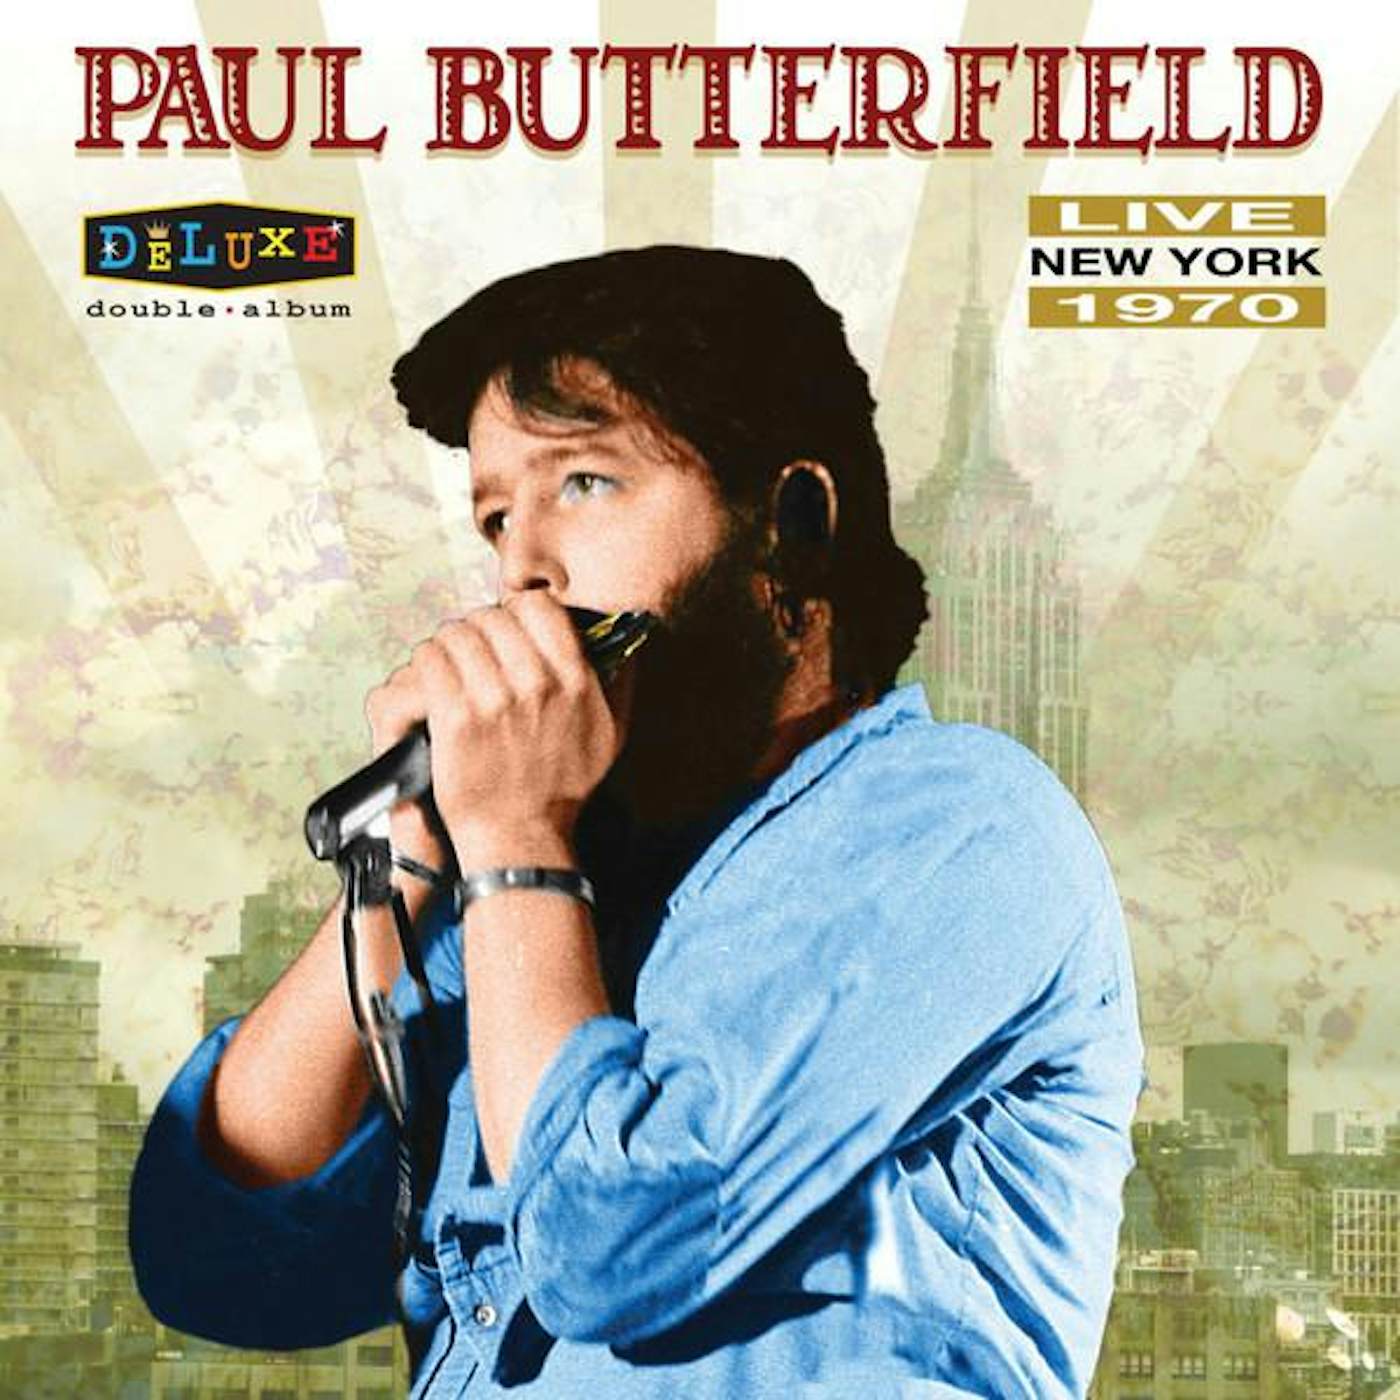 Paul Butterfield LIVE IN NEW YORK 1970 Vinyl Record